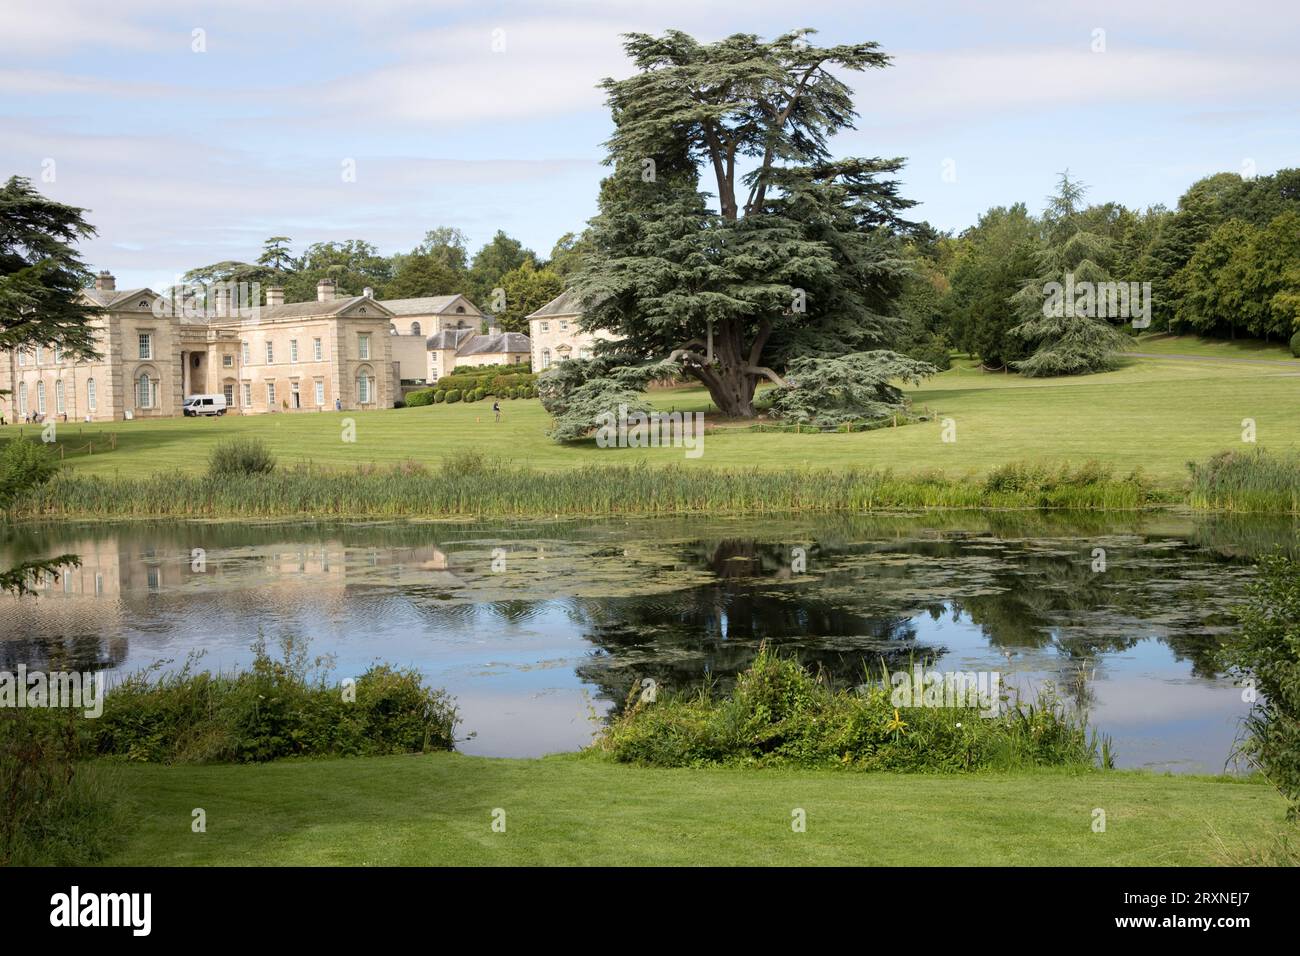 Compton Verney 18th Century manor house built by Robert Adam and now an independant national art gallery and lake set in a Capability Brown landscape Stock Photo